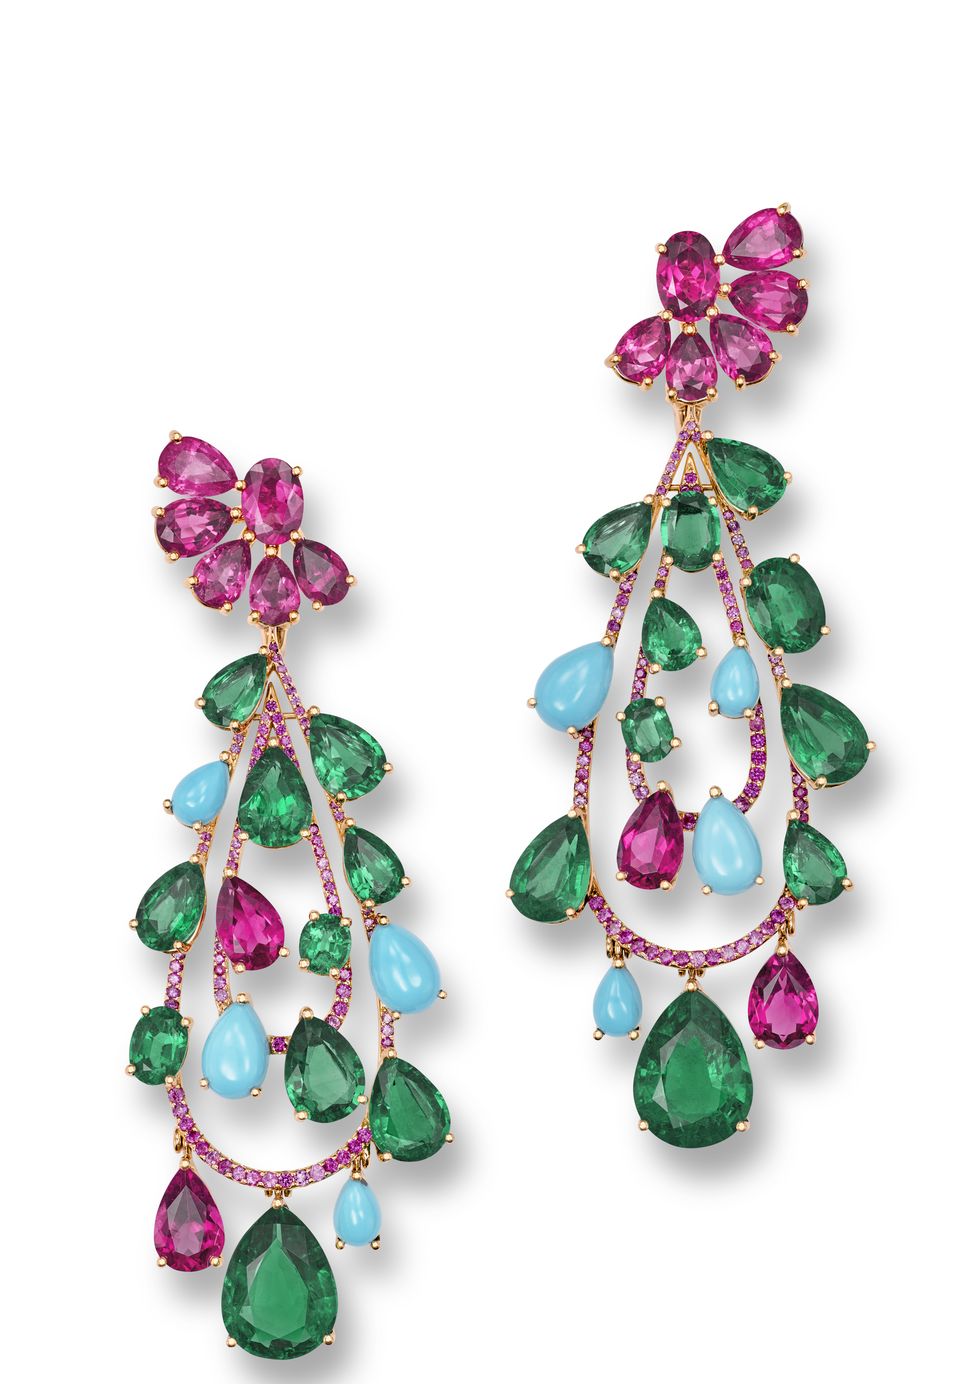 a pair of earrings with colorful beads